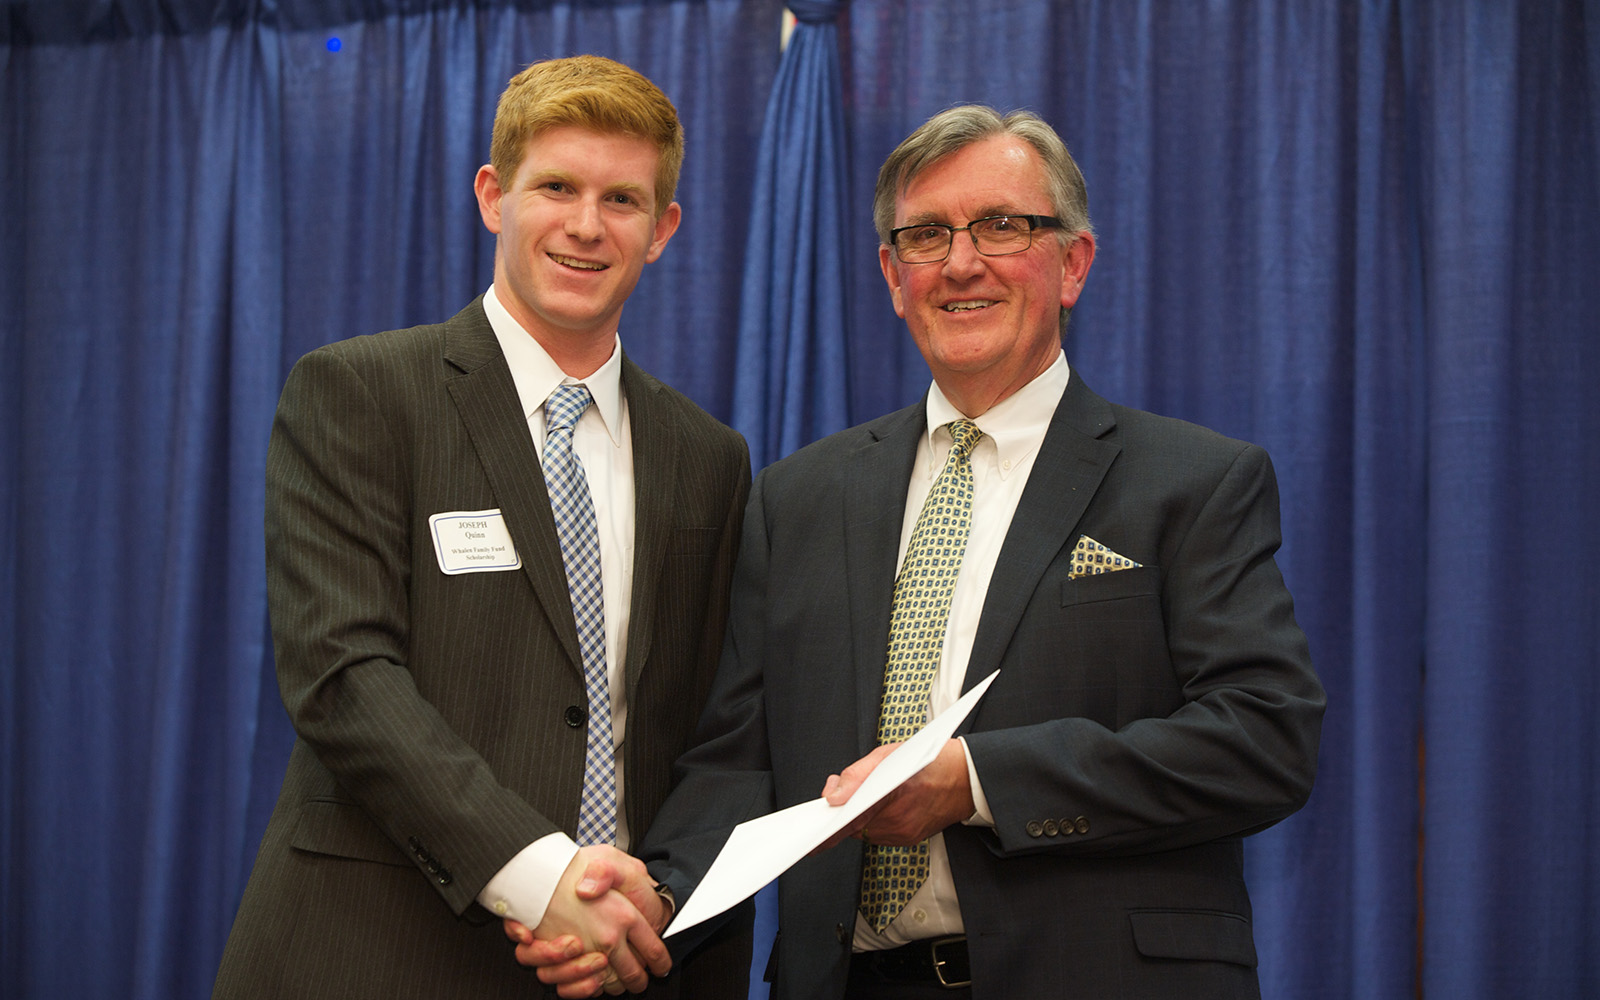 In this 2014 file photo, Professor Larry Gramling, then associate dean of Undergraduate Programs, poses with scholarship recipient Joseph Quinn during the Accounting Honors Banquet. (Kim Bova/UConn School of Business)